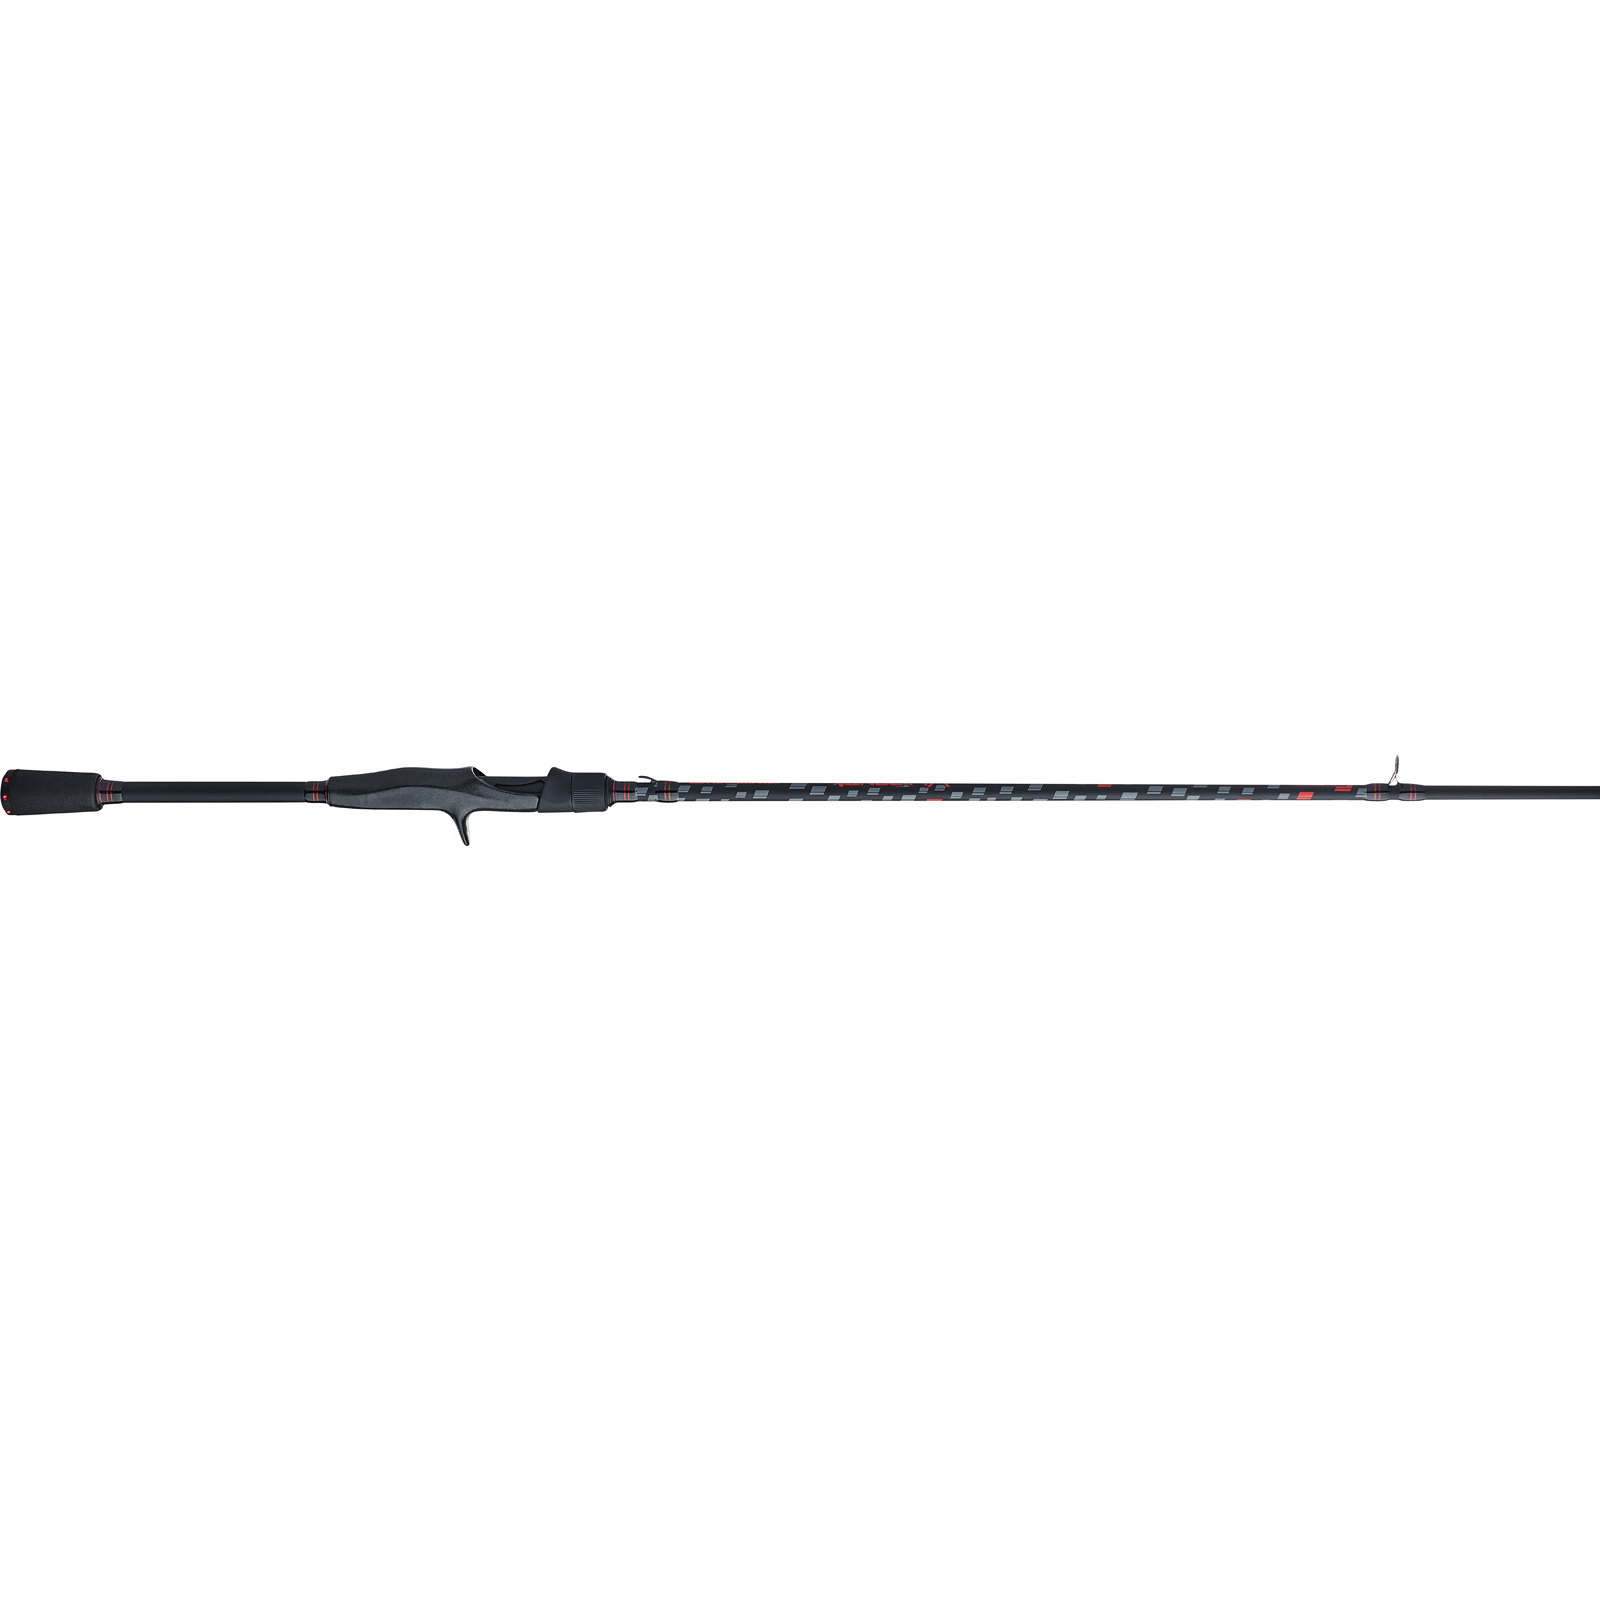 Abu Garcia Fishing Rods & Poles with 7 Guides and 2 Pieces for